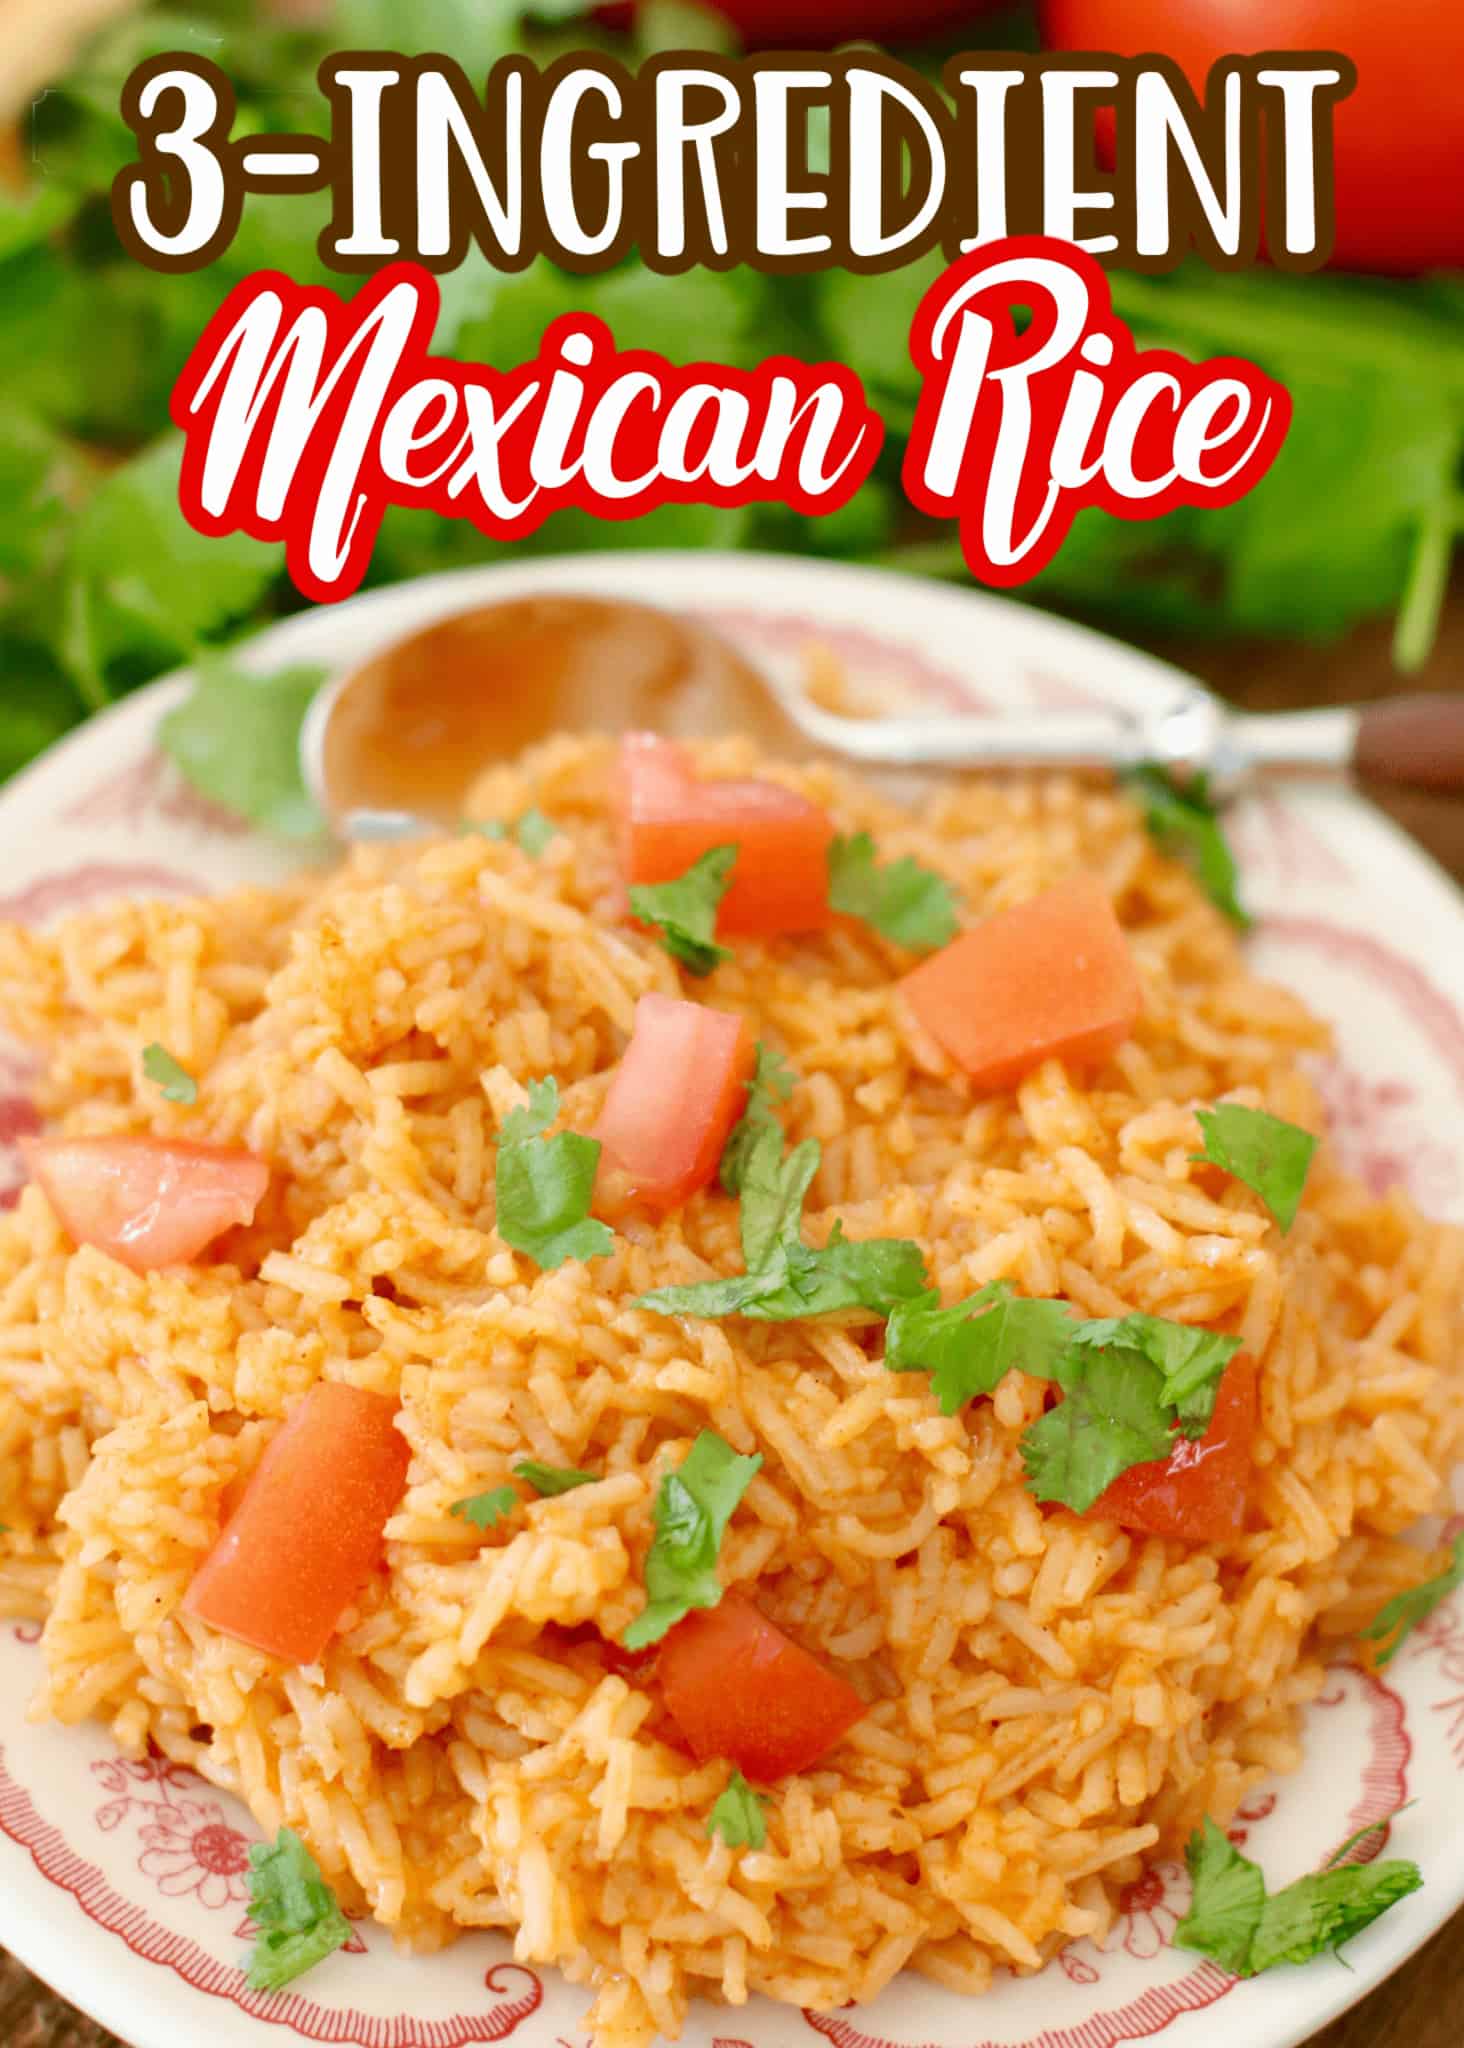 Mexican Restaurant Rice recipe from The Country Cook, rice shown on a round plate.